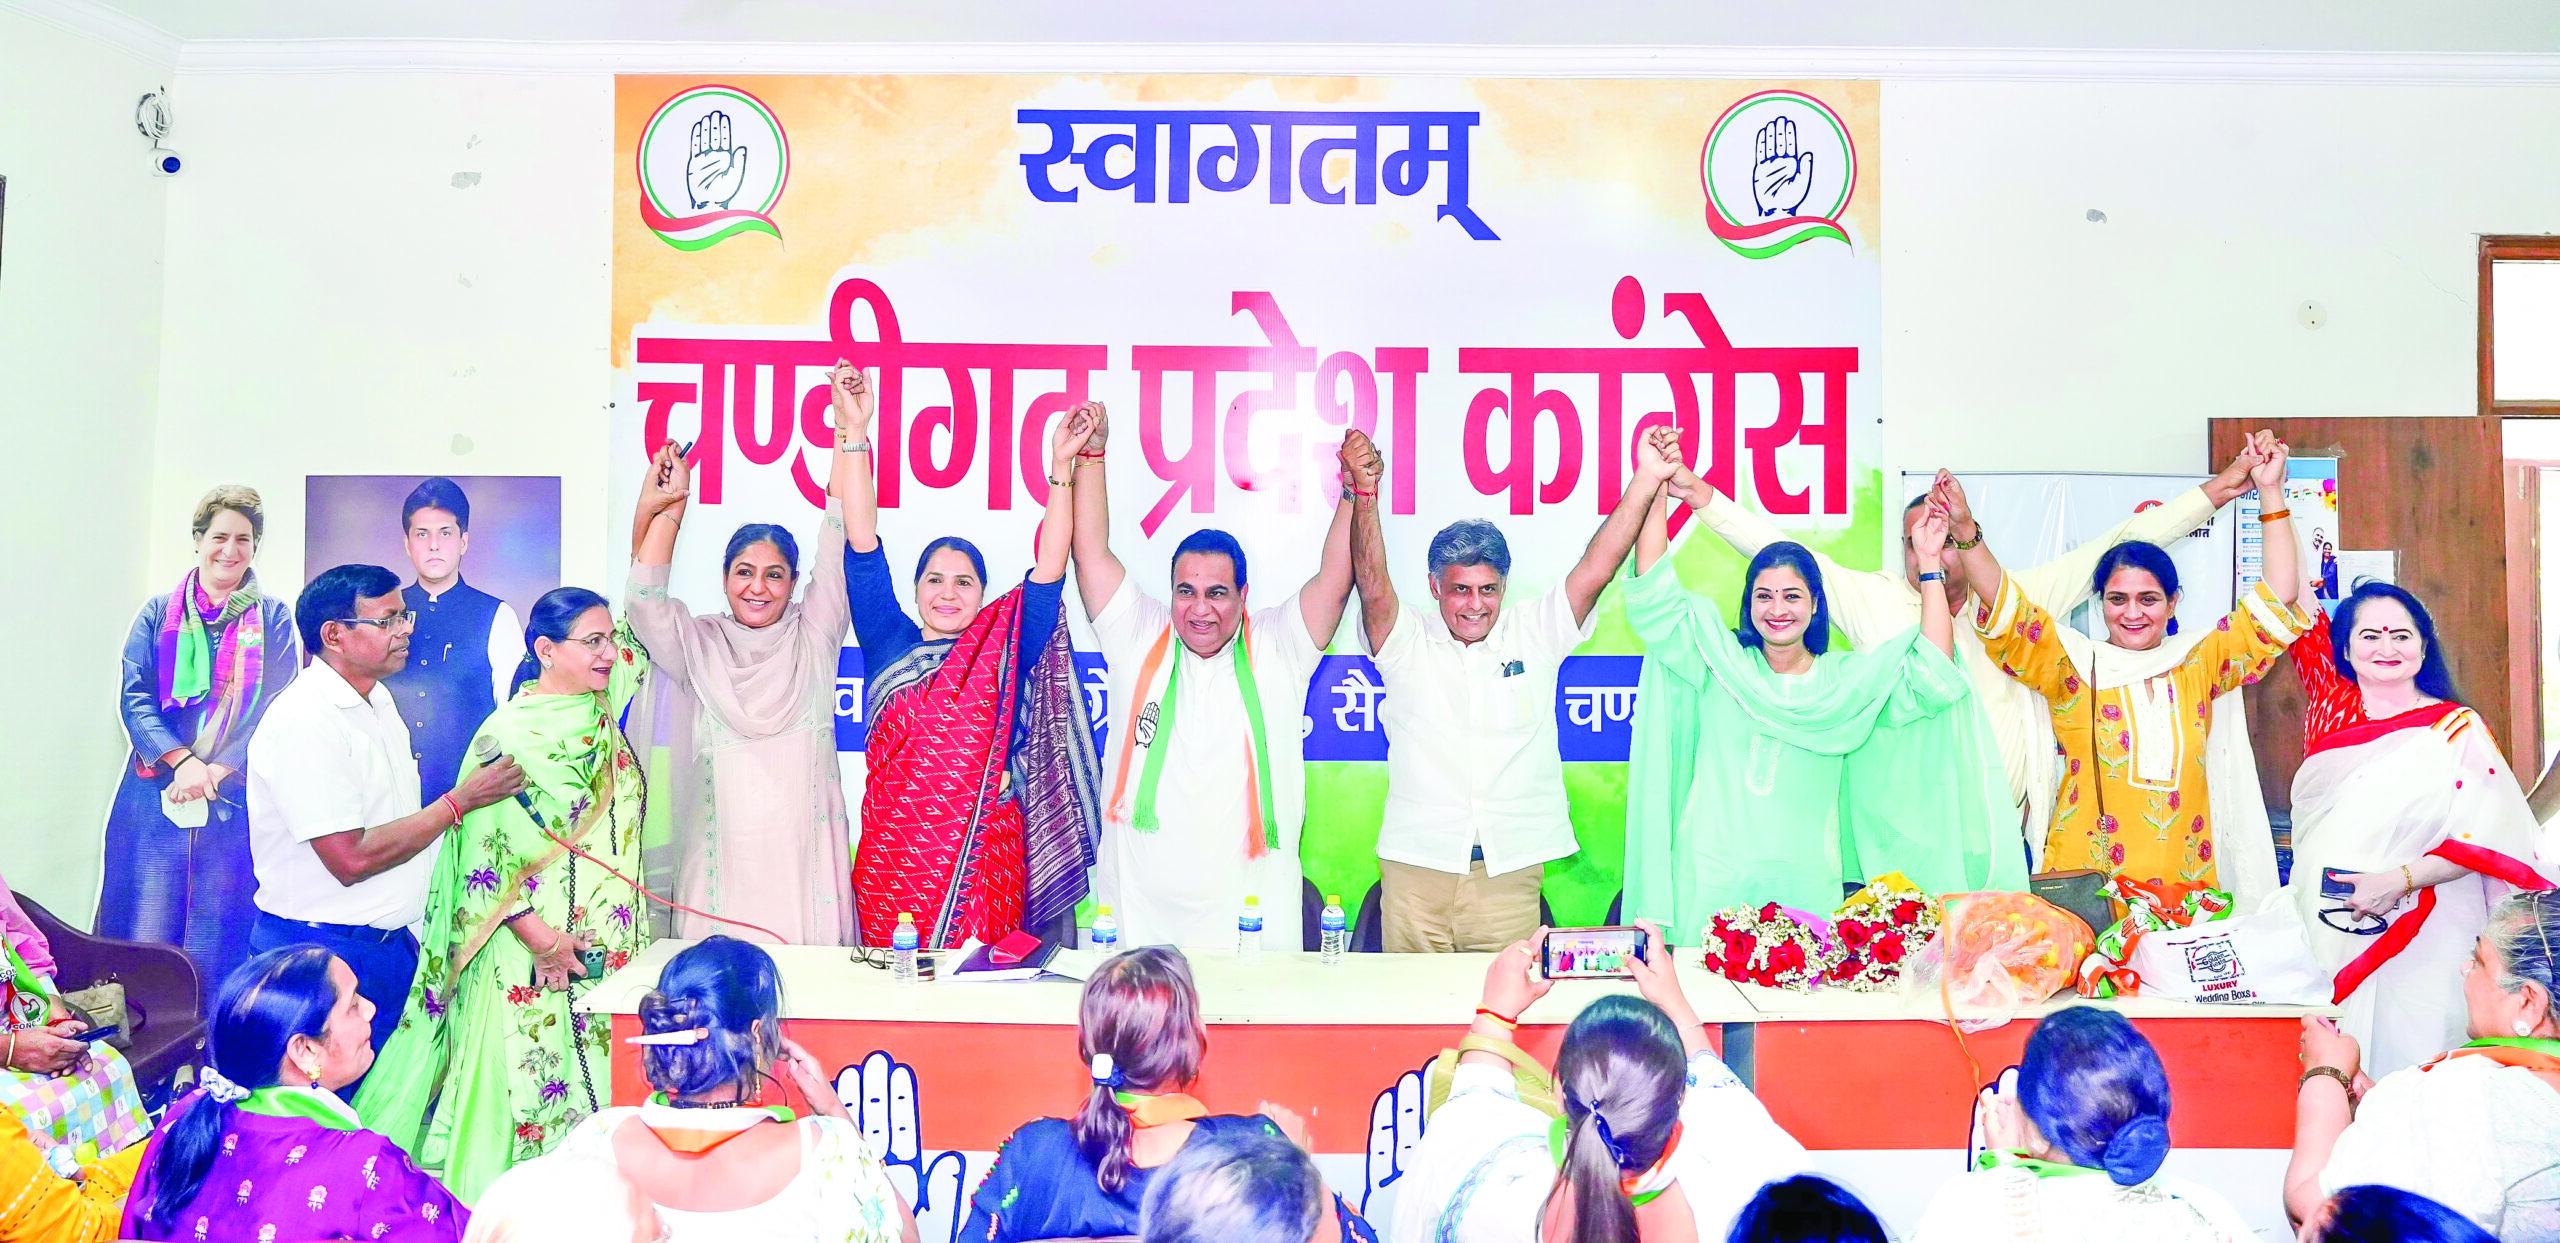 Congress will provide 50 percent reservation to women in jobs: Lamba 